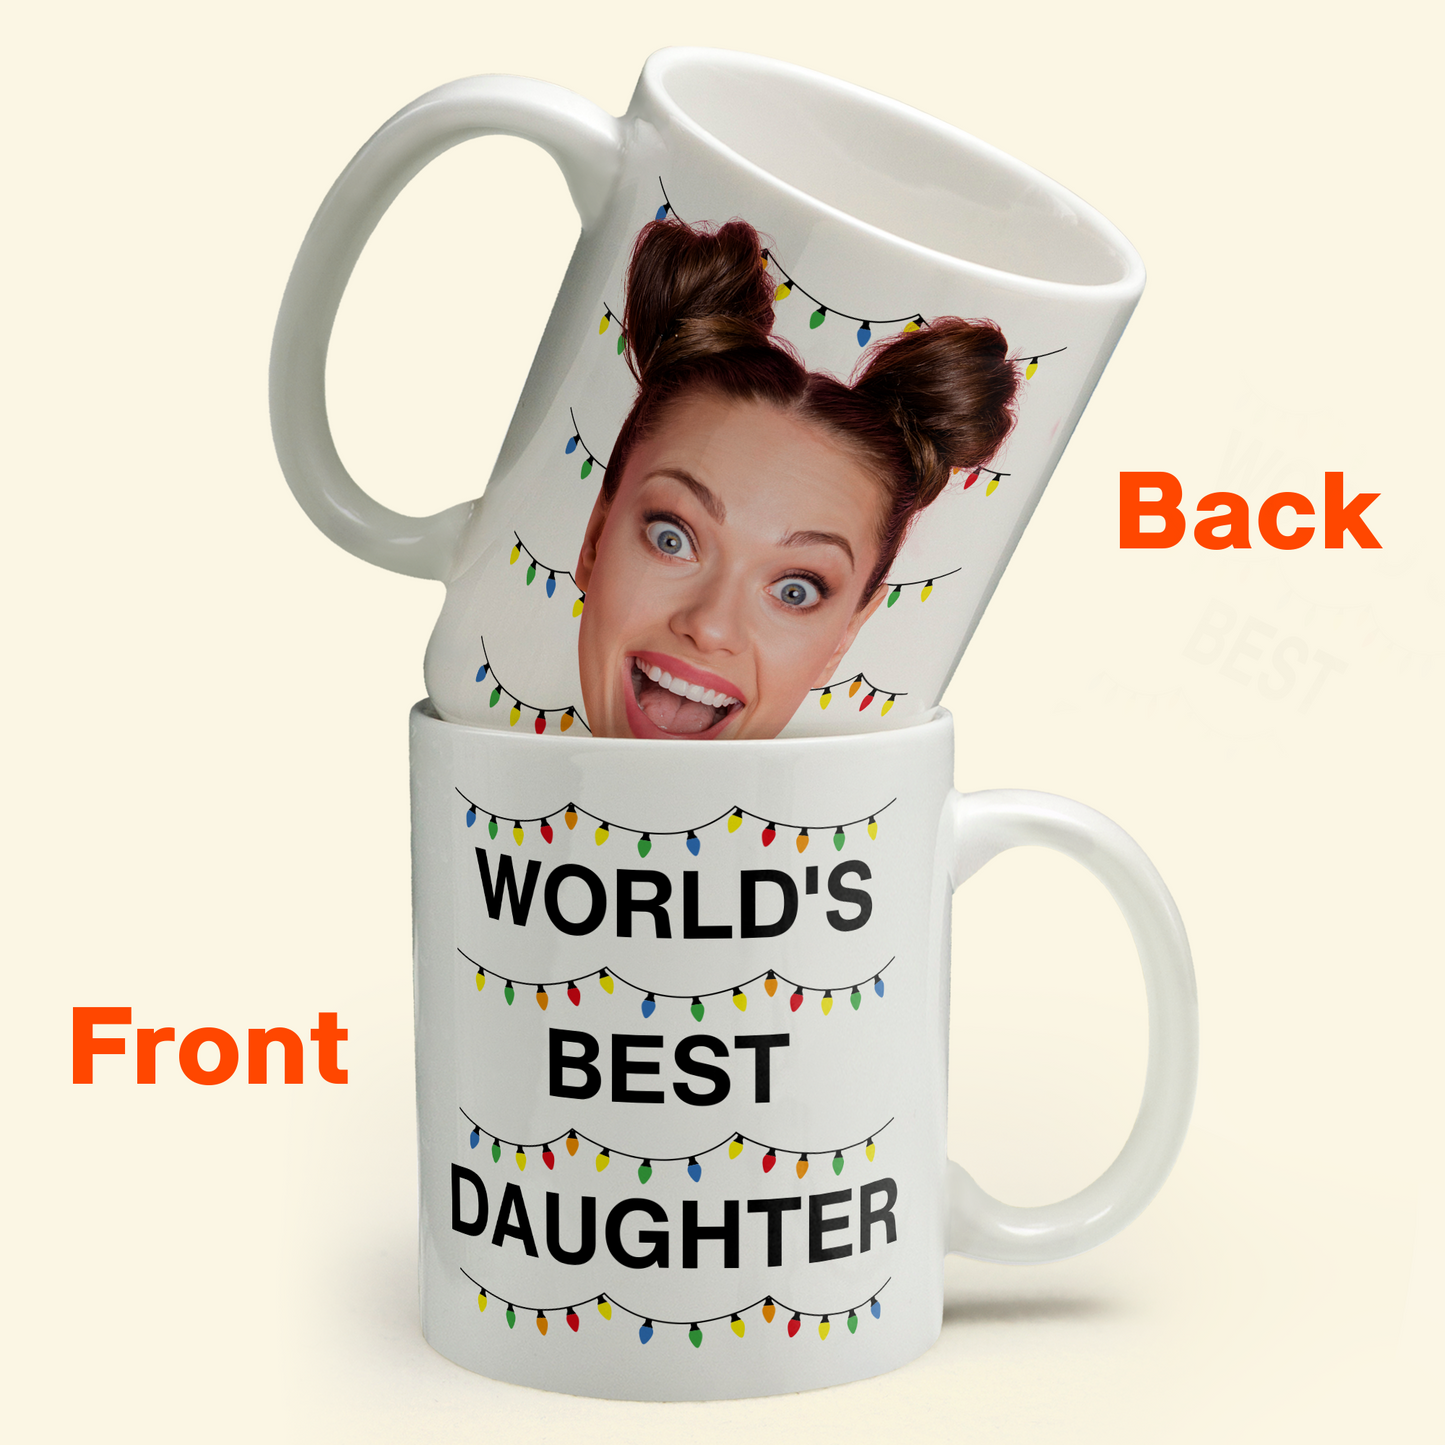 World's Best Daughter Funny Custom Face - Personalized Photo Mug